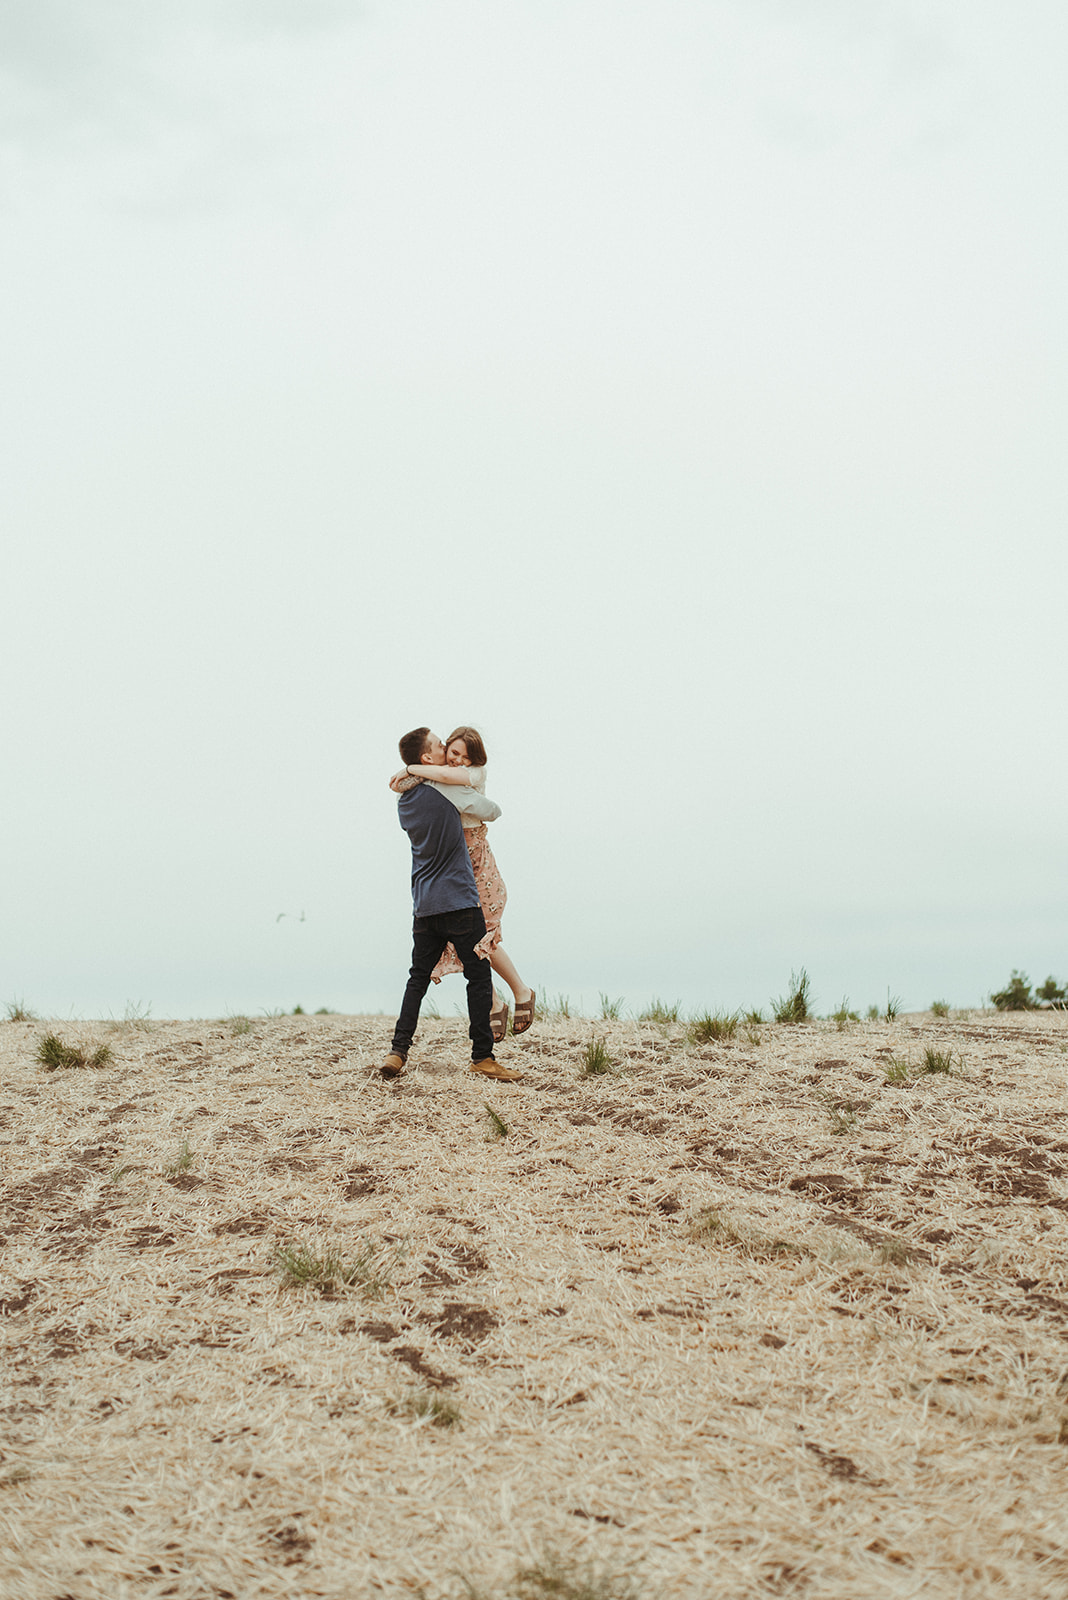 6 Tips All About Choosing Outfits For Your Engagement Session - Jessica Kaitlyn featured on Bronte Bride